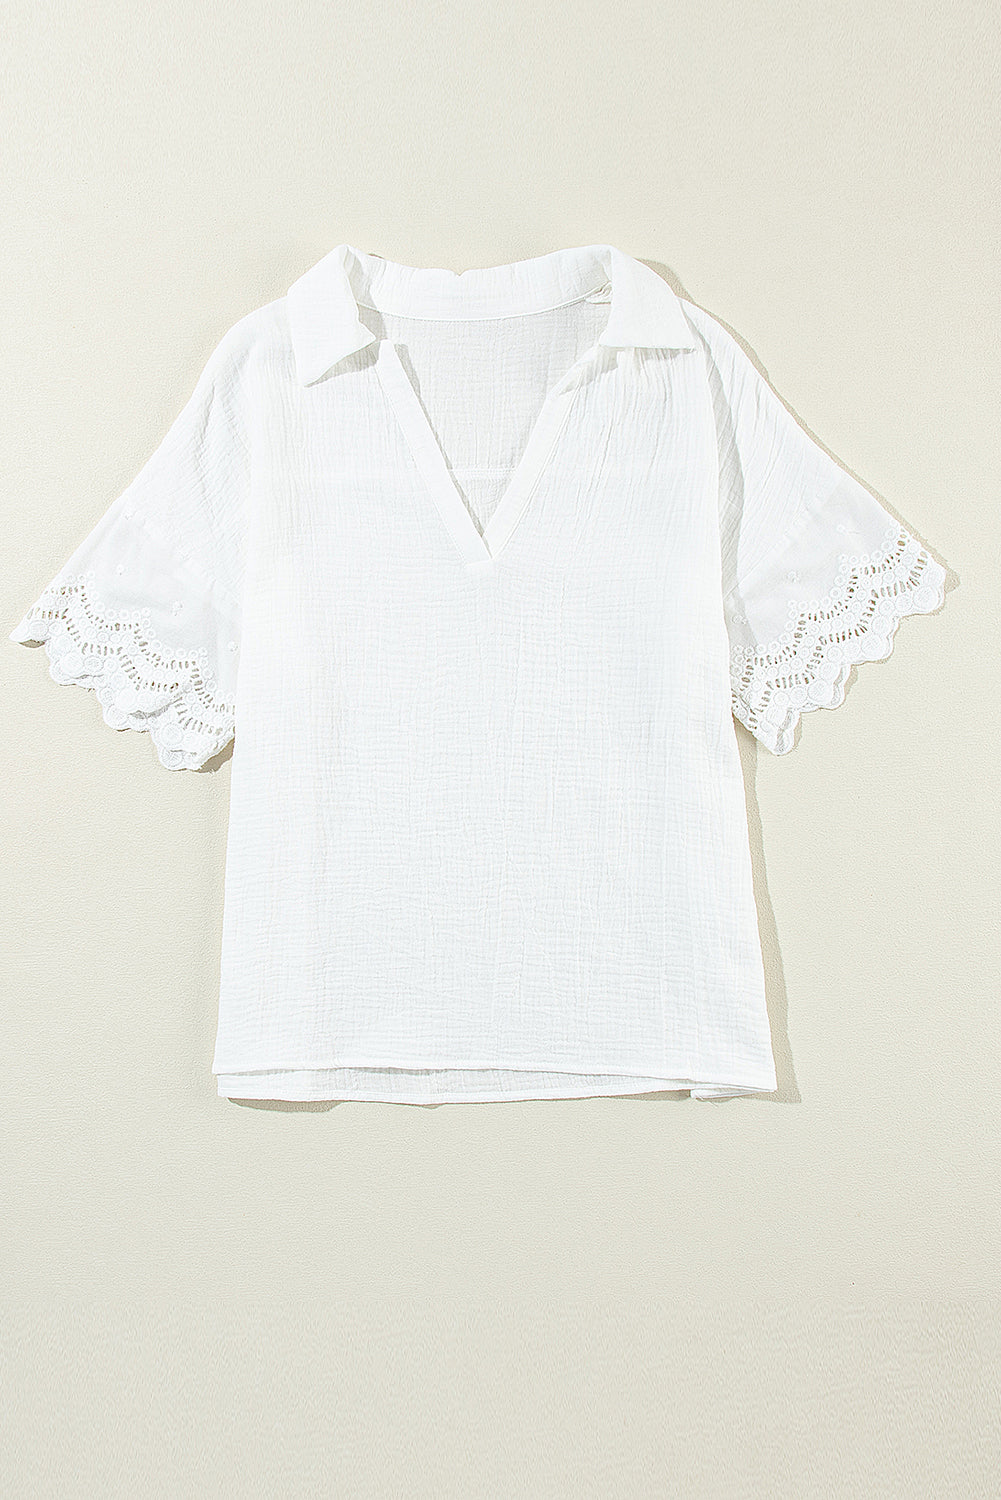 White Crinkled Lace Splicing Sleeve Collared V Neck Blouse